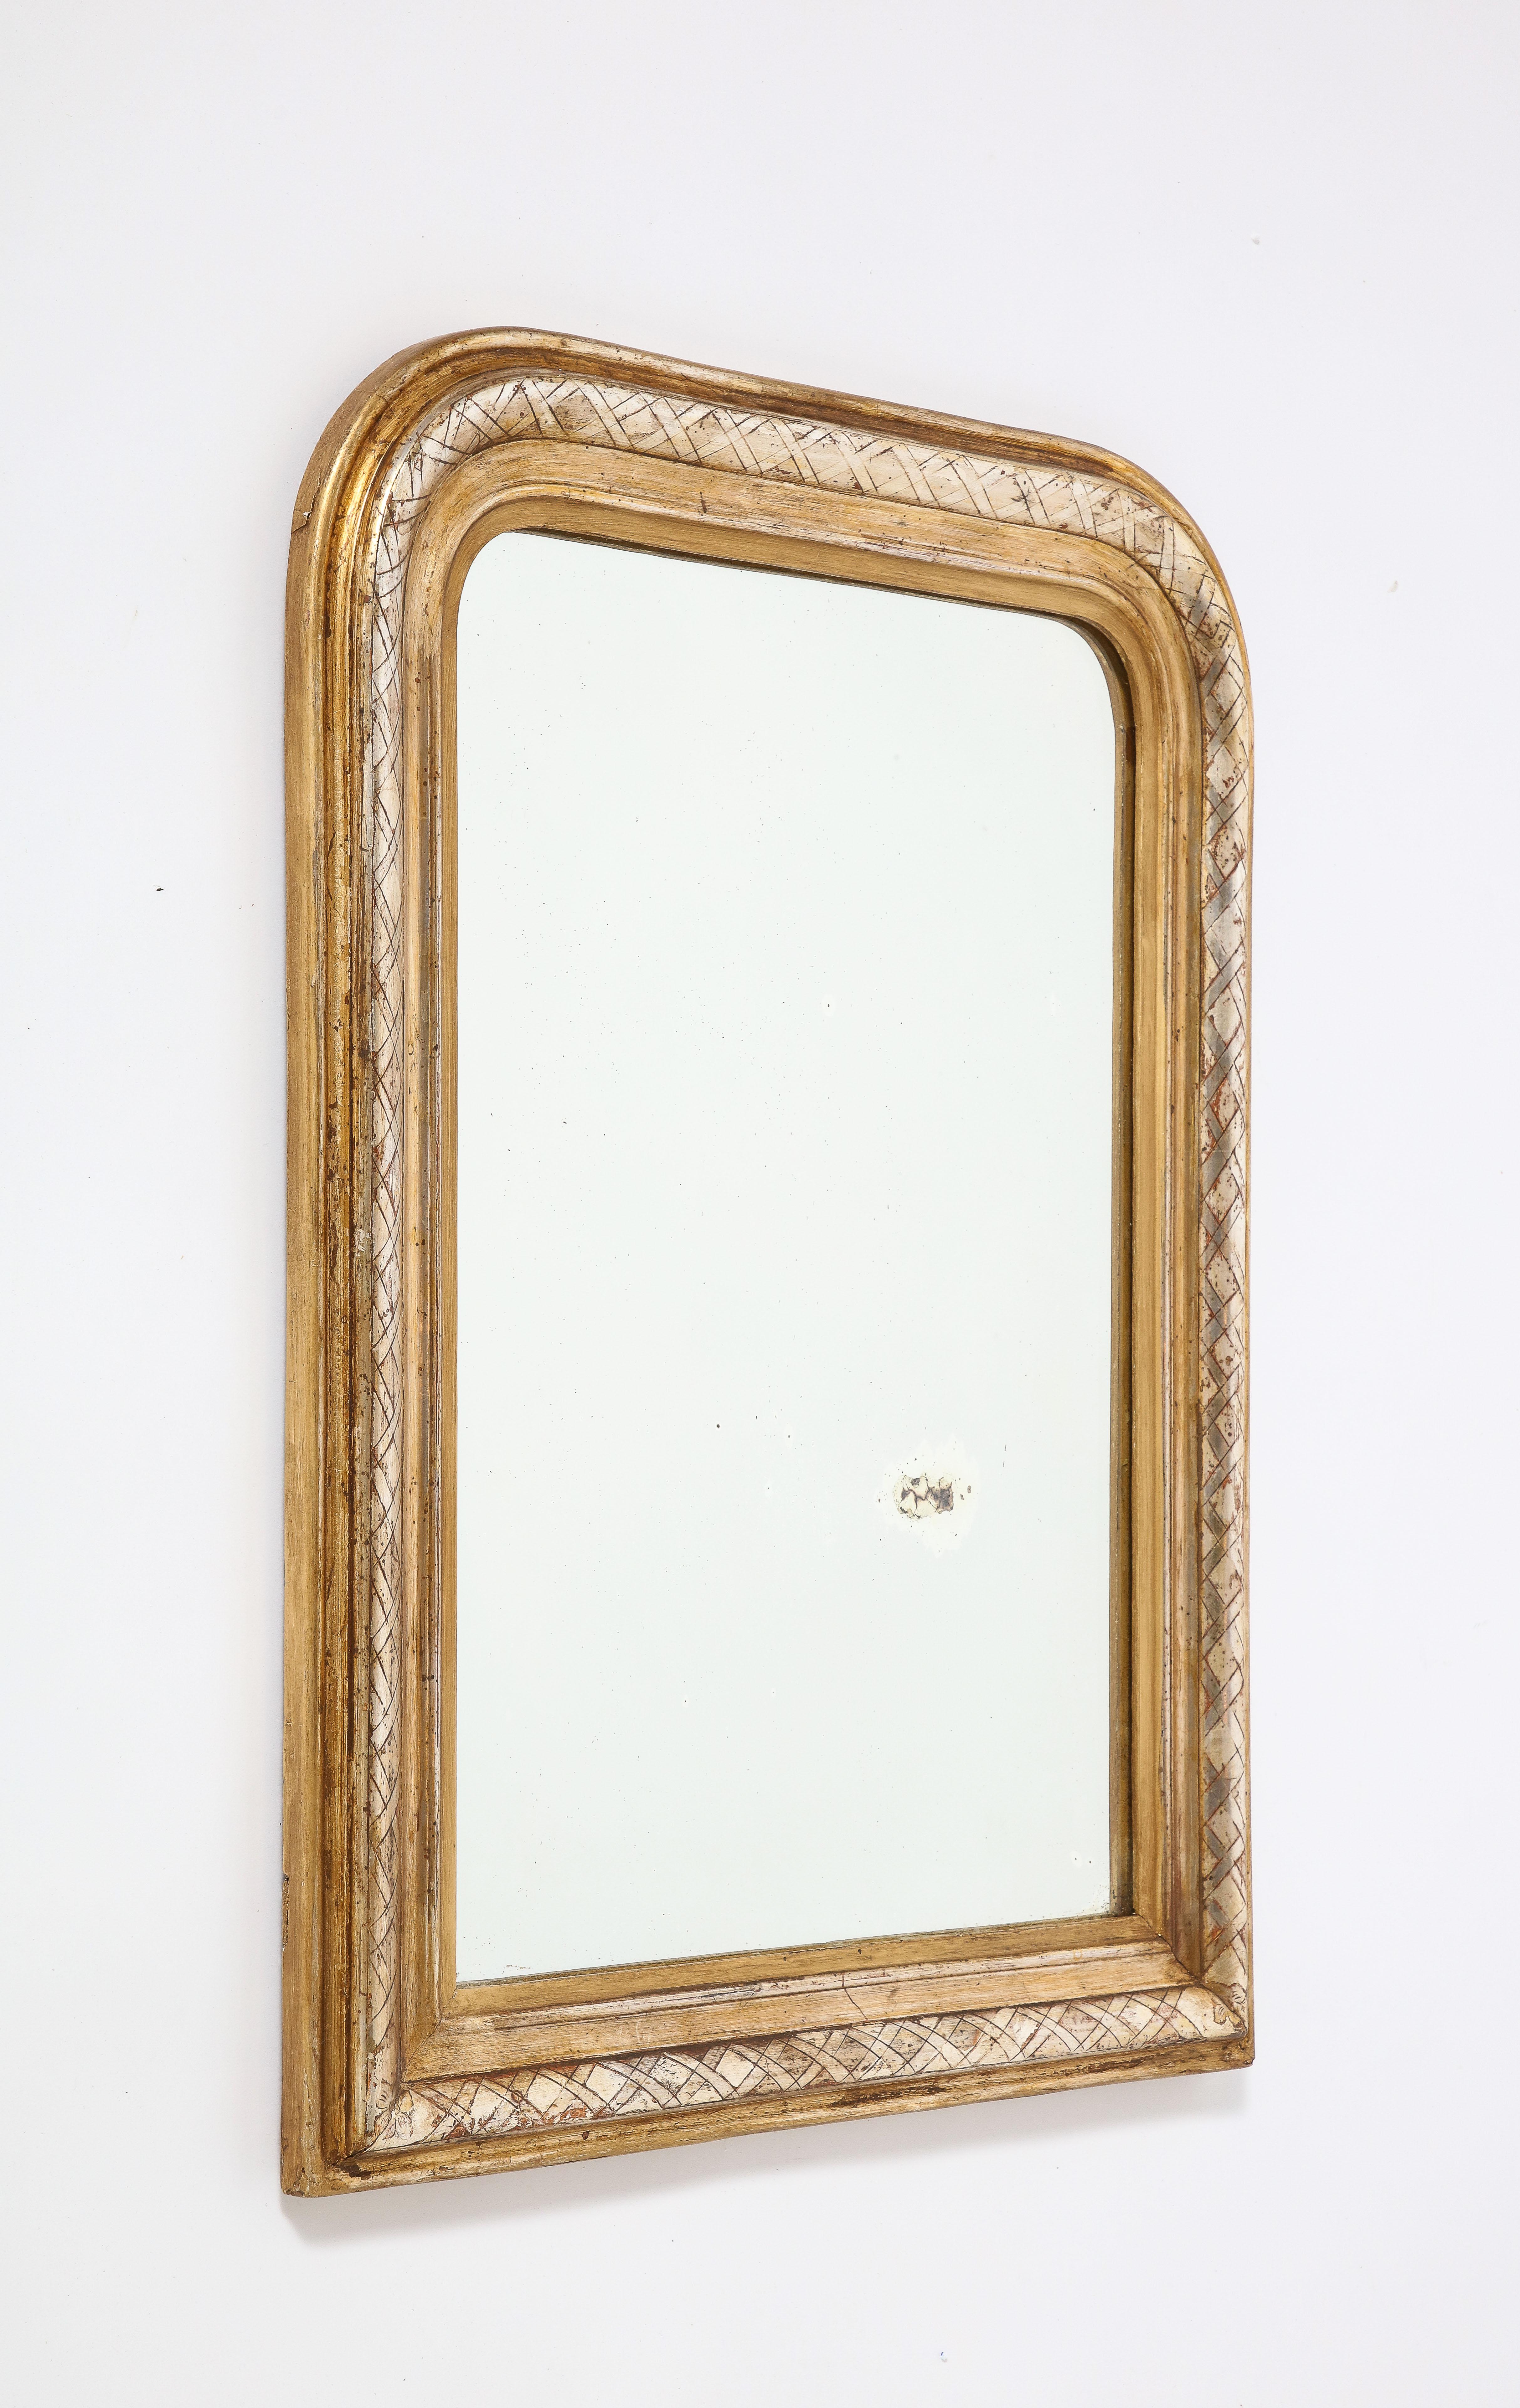 An early very fine French Louis Philippe carved and gilded mirror with cross-hatch motif on the inner molding and traces of silver gilt.  Original glass plate and wood backing. 
An exceptional example of the period with real gilding and in excellent